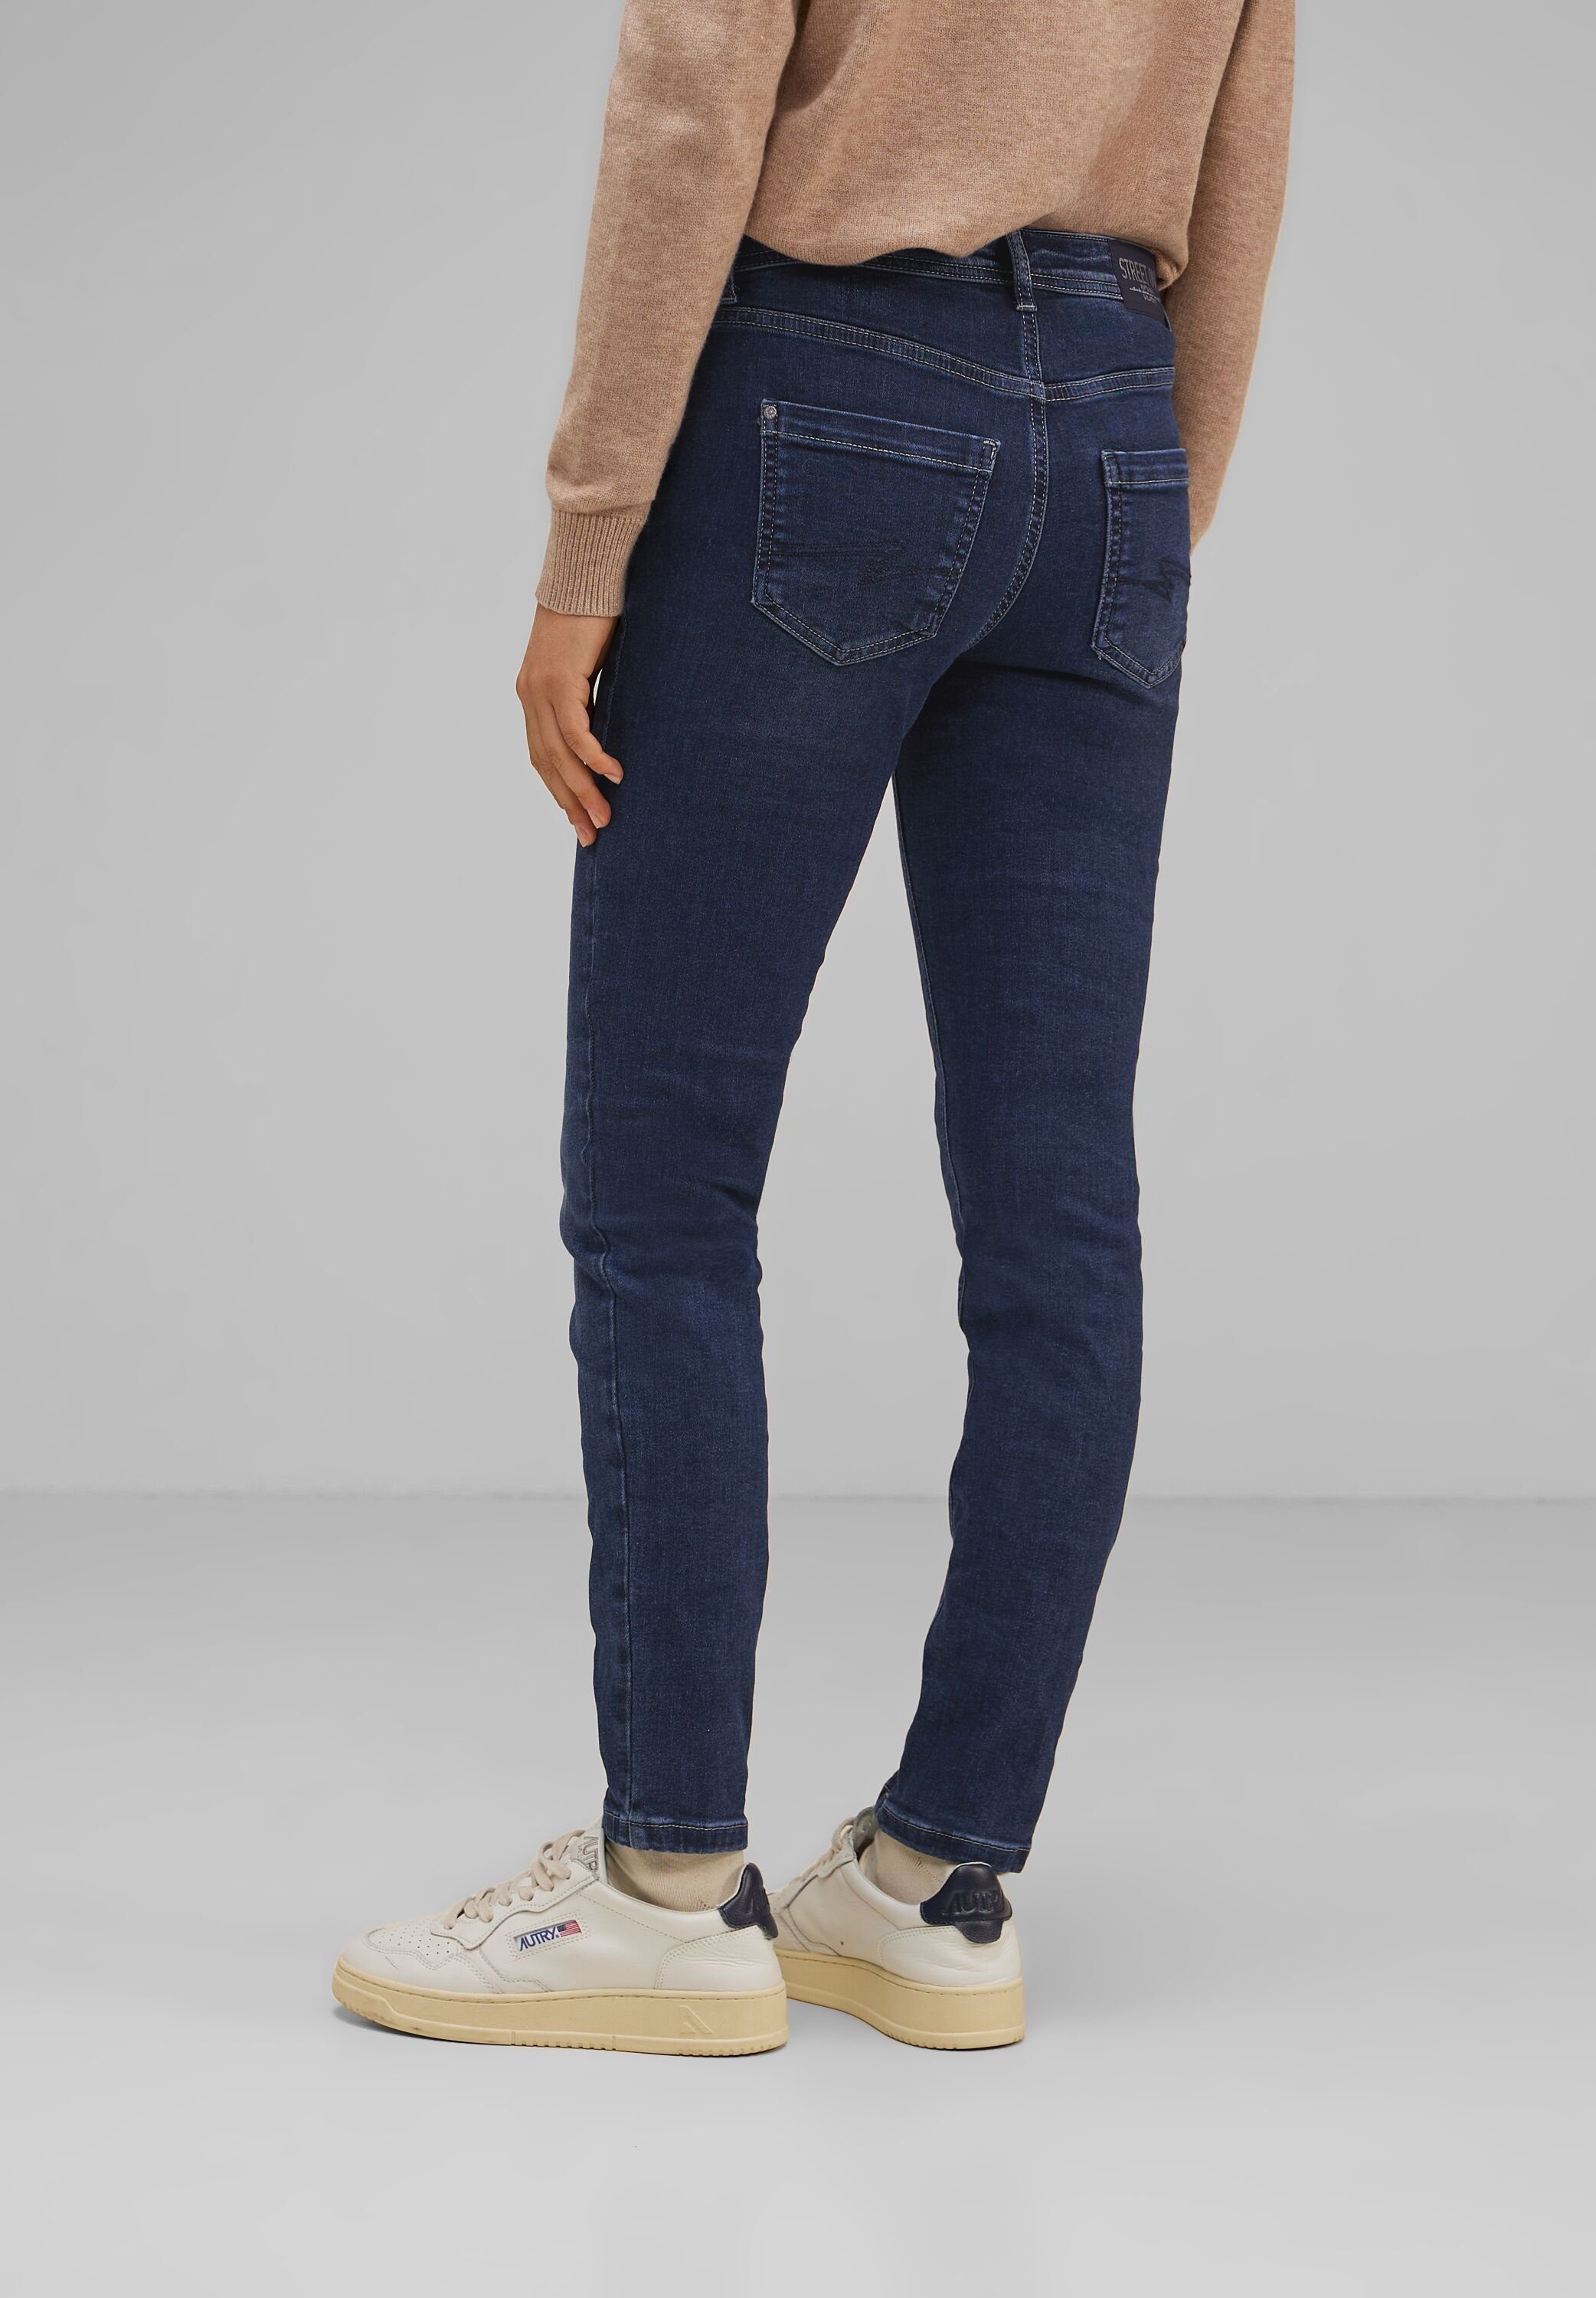 STREET Materialmix ONE softer Slim-fit-Jeans